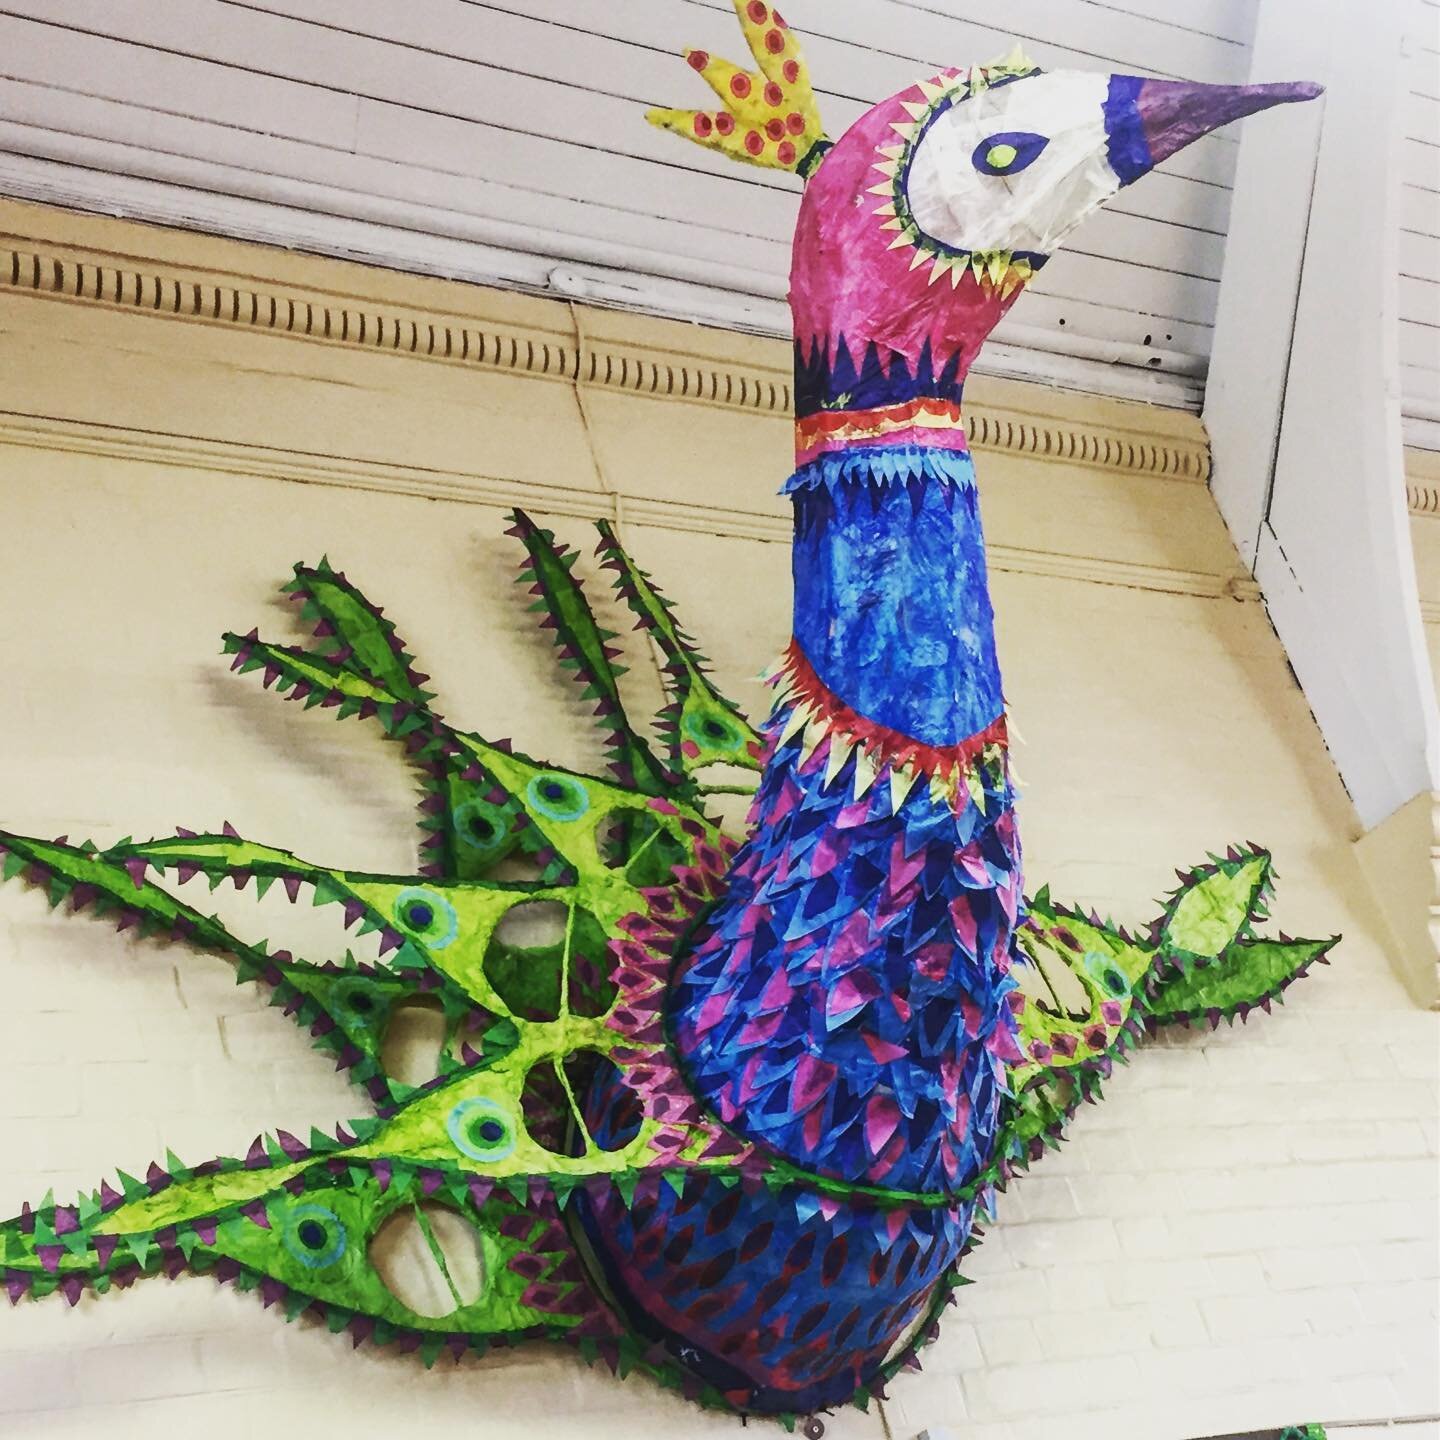 This was a great fun piece to make with Y3 and 4 pupils at Welbourne Primary school Tottenham. #peacock #willowsculpture #schoolart #centrepiece #feathers #sculpture #schooldisplay #artworkshops #artistinschools #theschoolartist